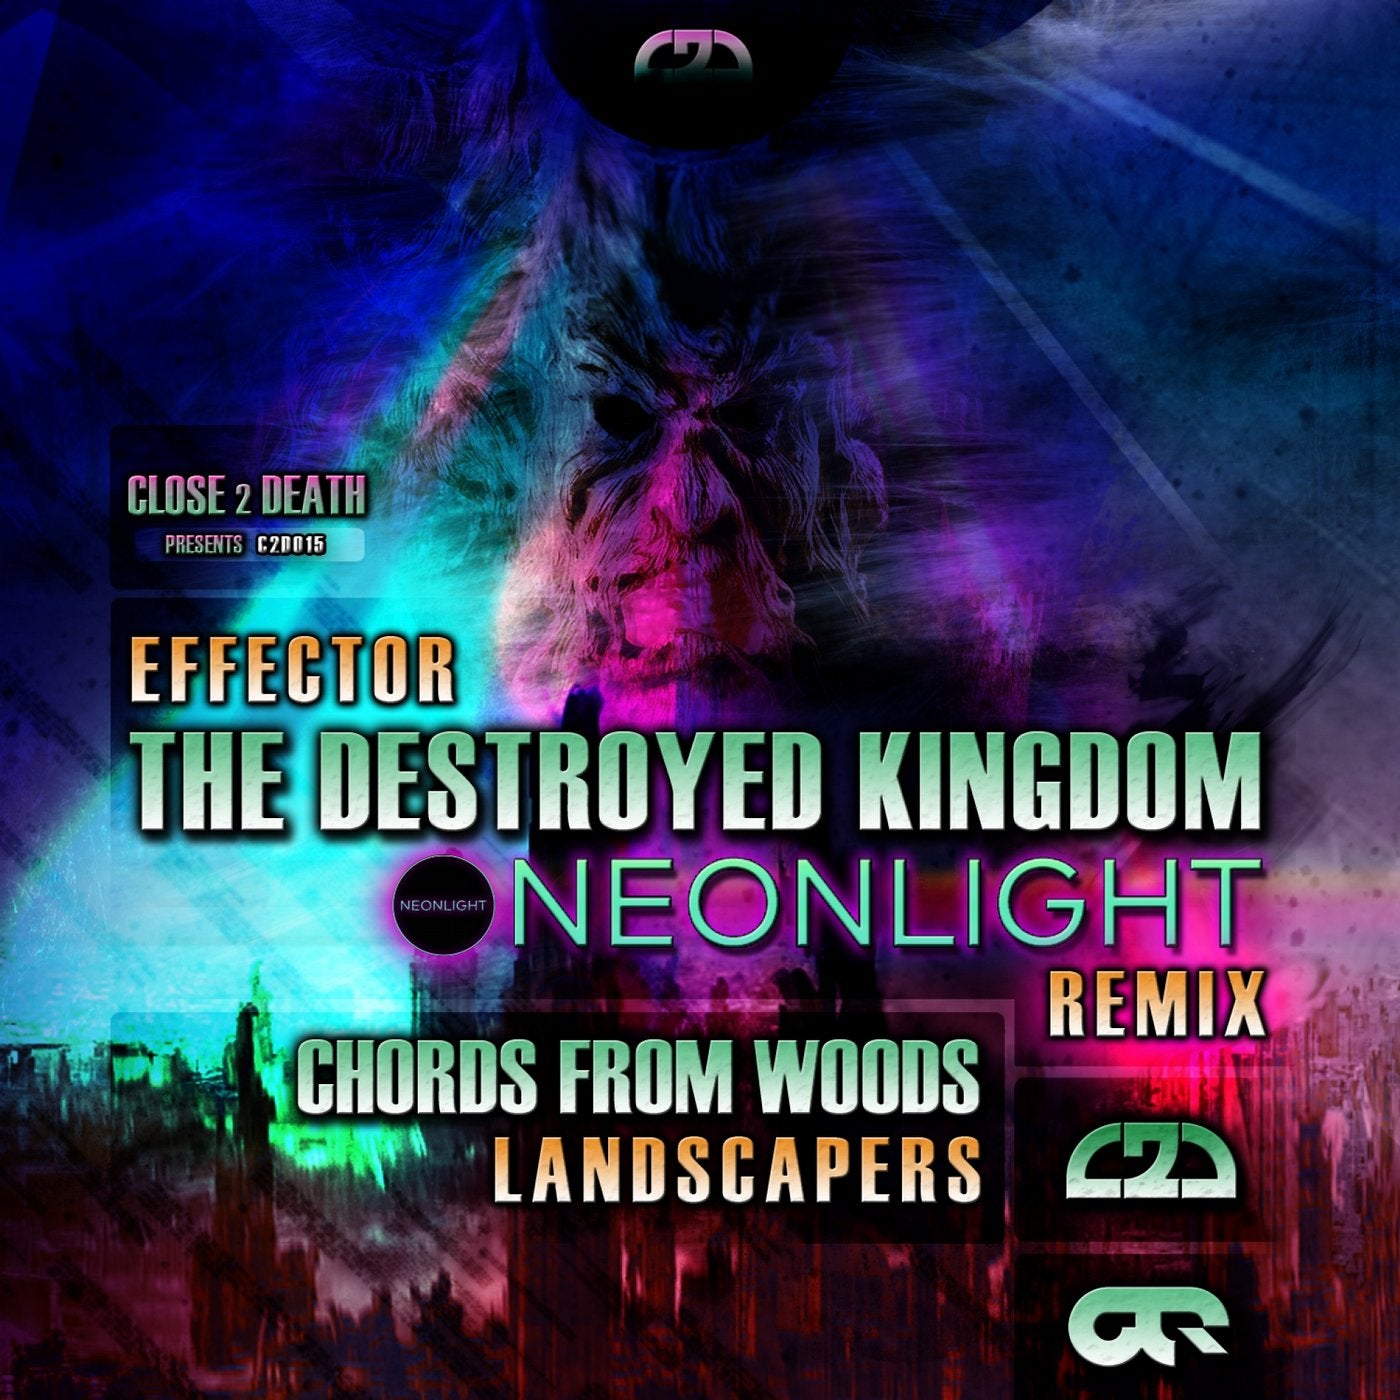 The Destroyed Kingdom - Neonlight Remix / Chords From Woods